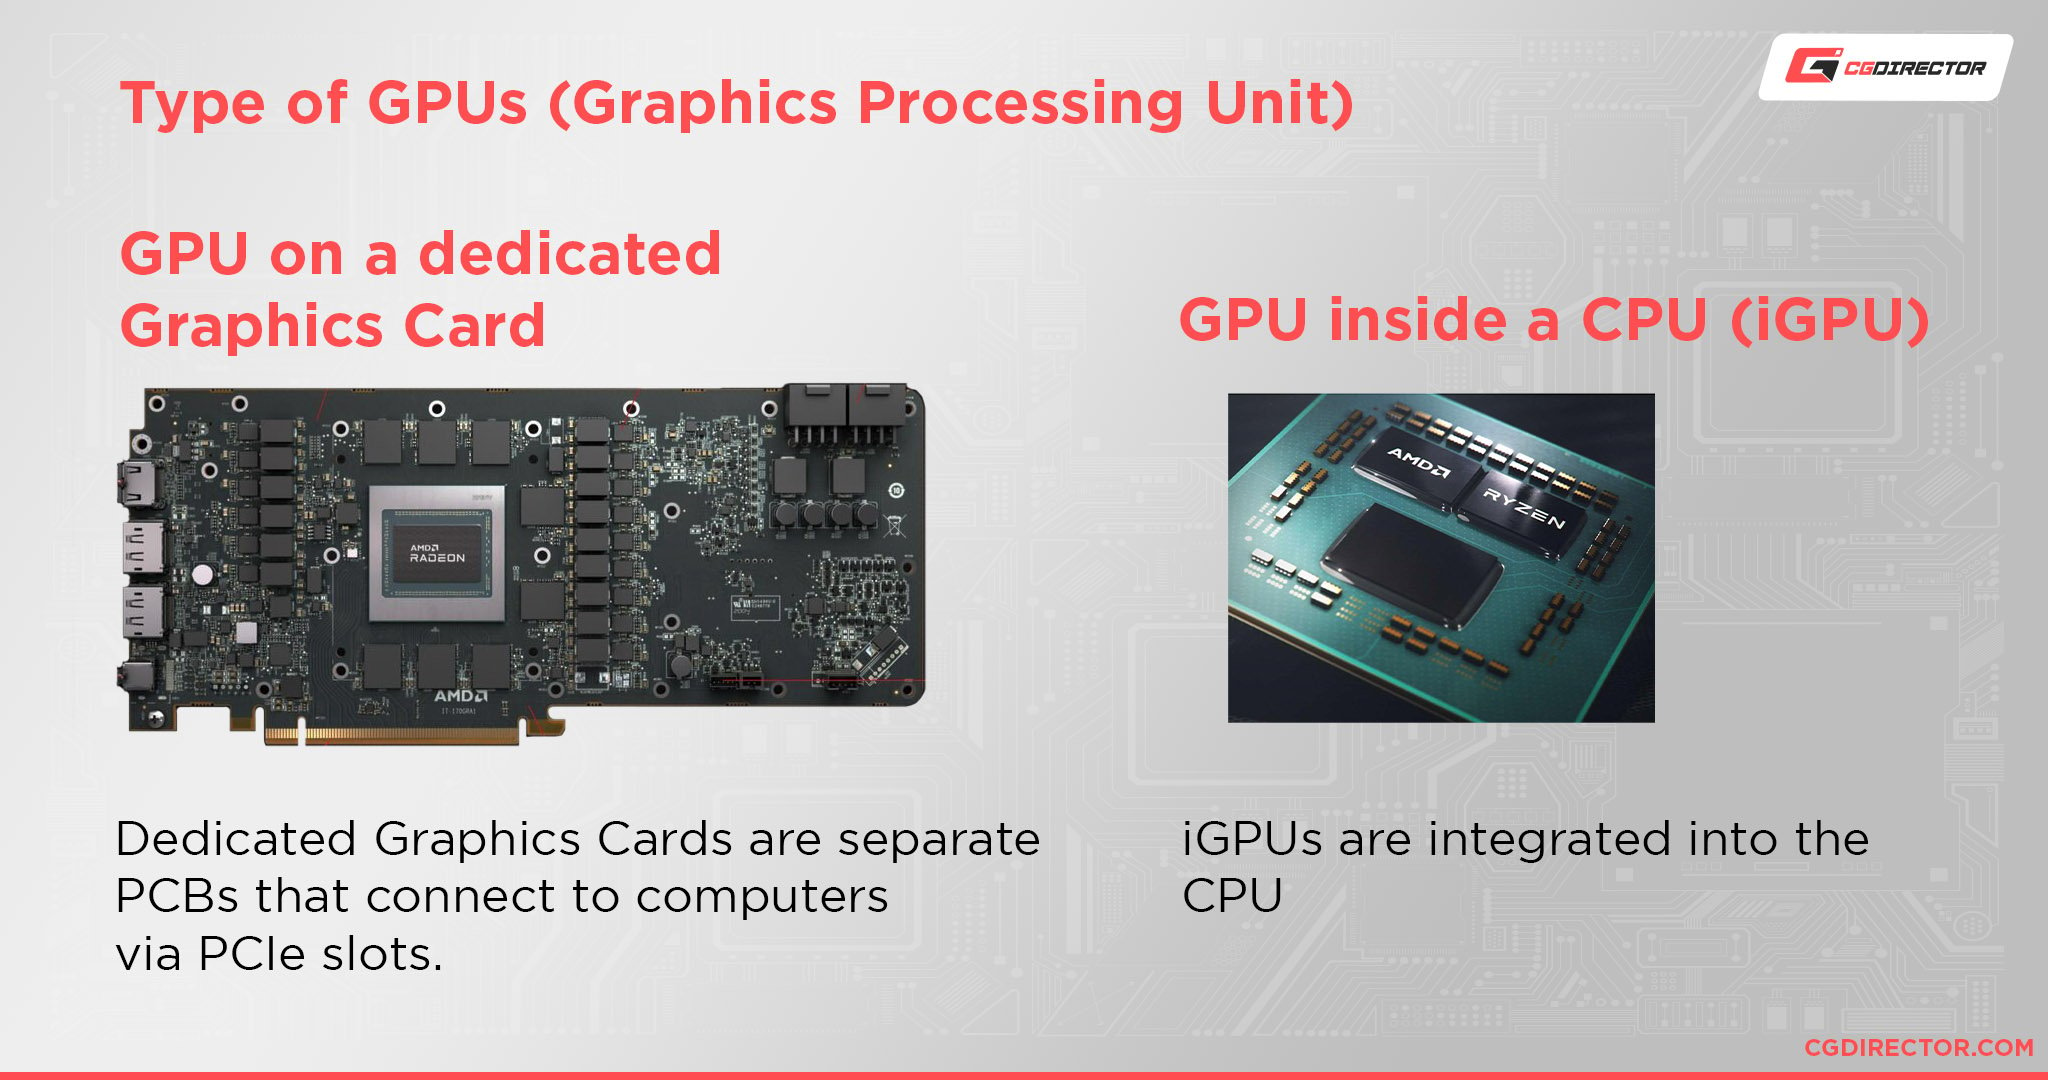 Type of GPUs - On a Dedicated Graphics Card and integrated into a CPU